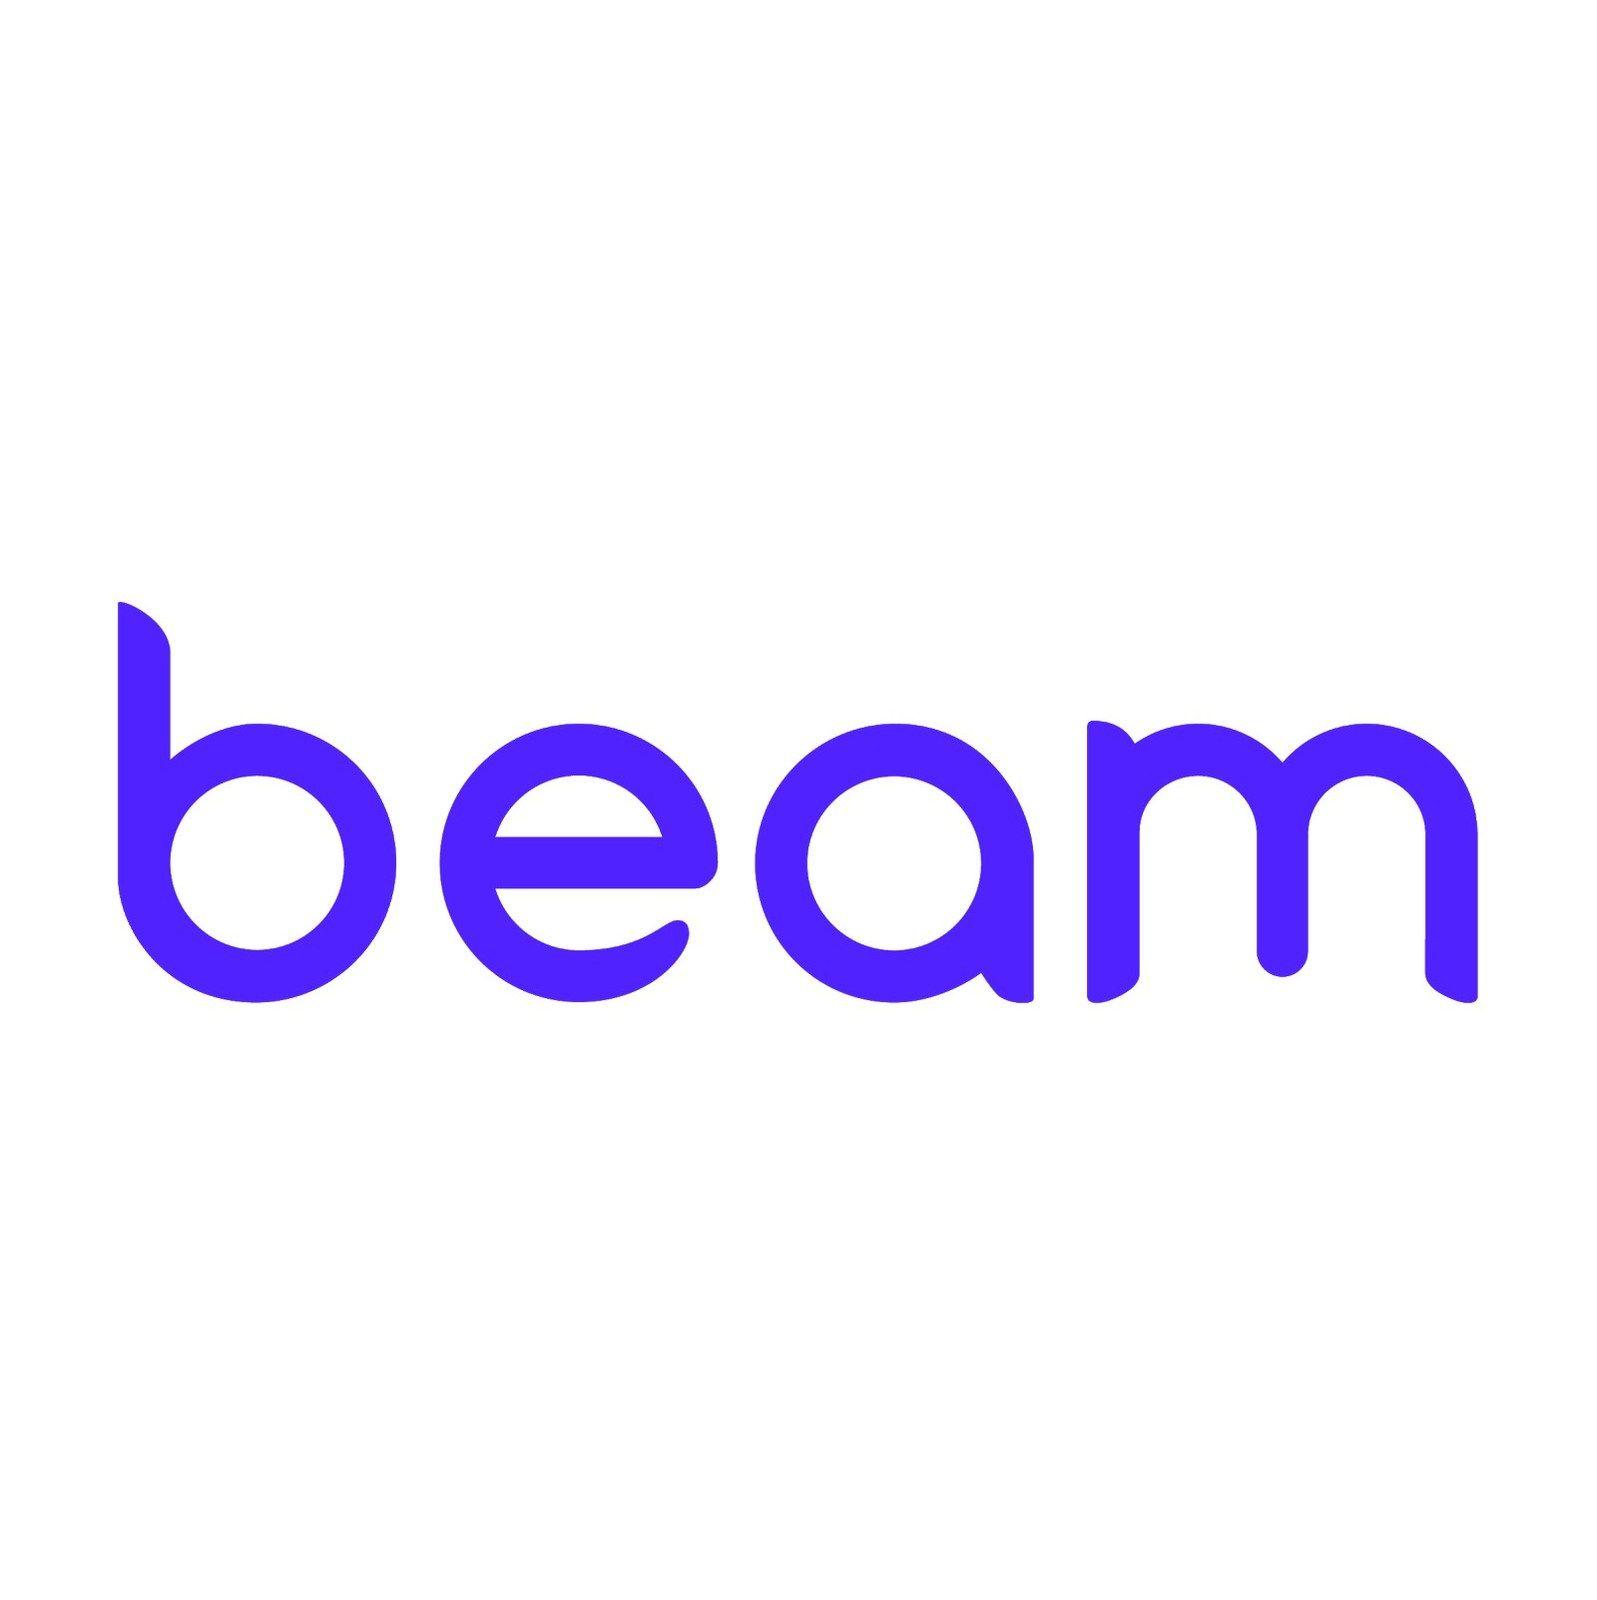 Beam Logo - Beam's rapid growth and expansive footprint make it the largest ...